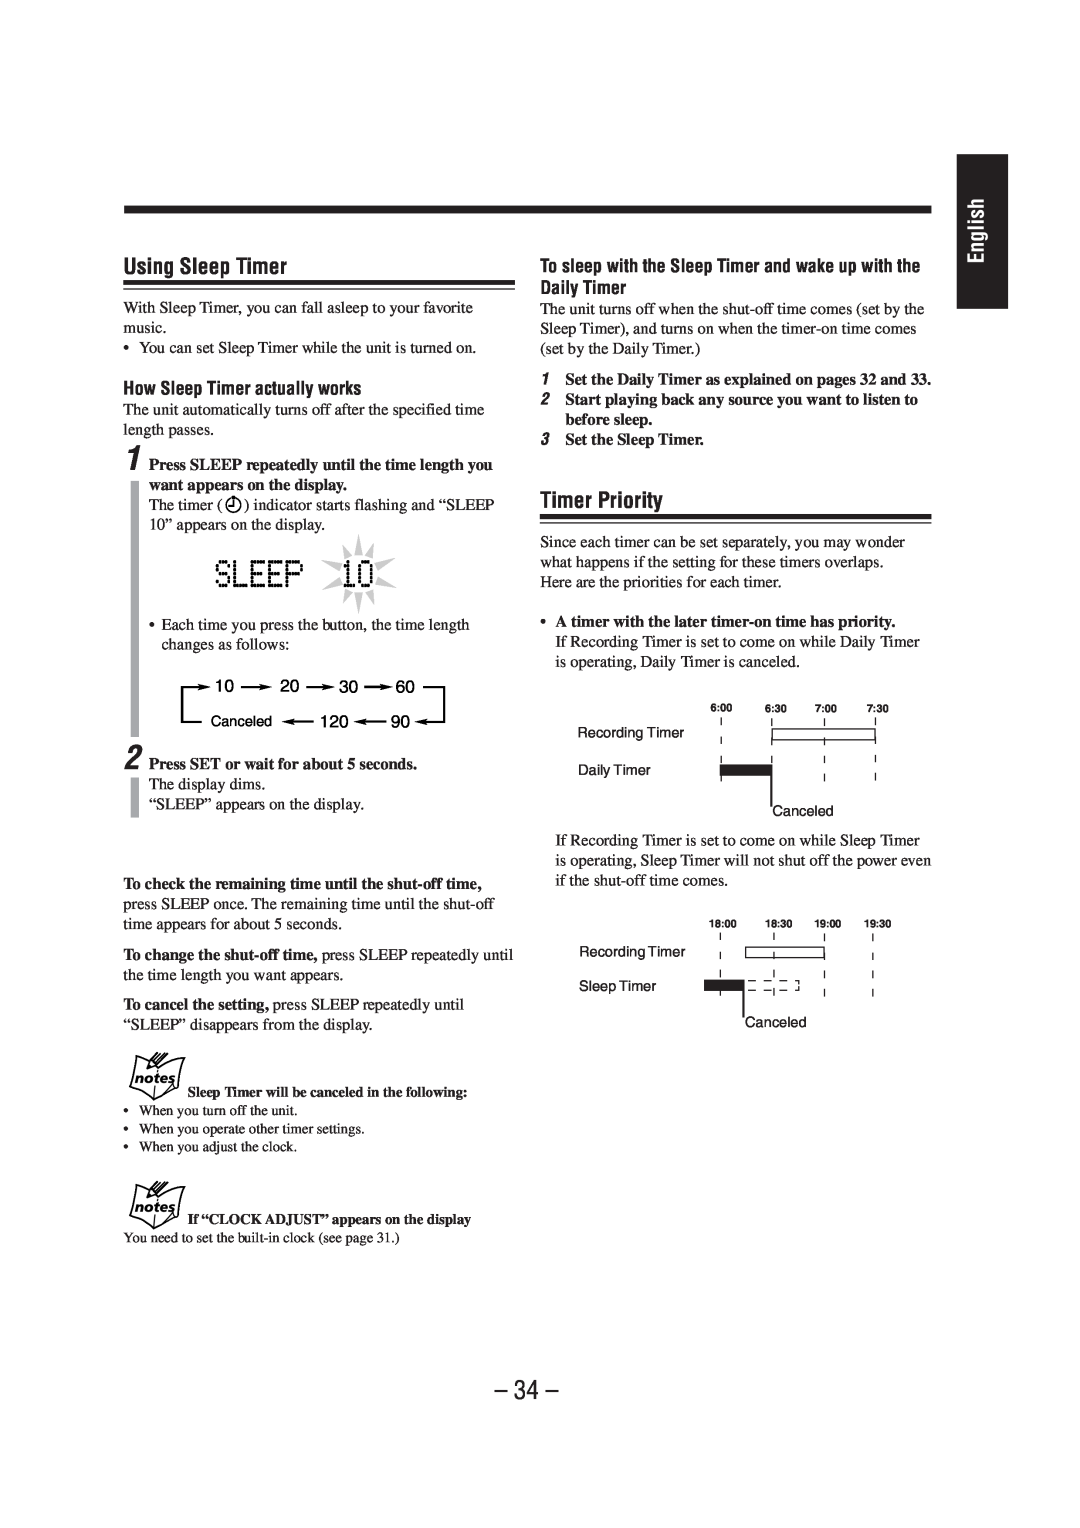 JVC UX-A52 manual Using Sleep Timer, Timer Priority, English, How Sleep Timer actually works 